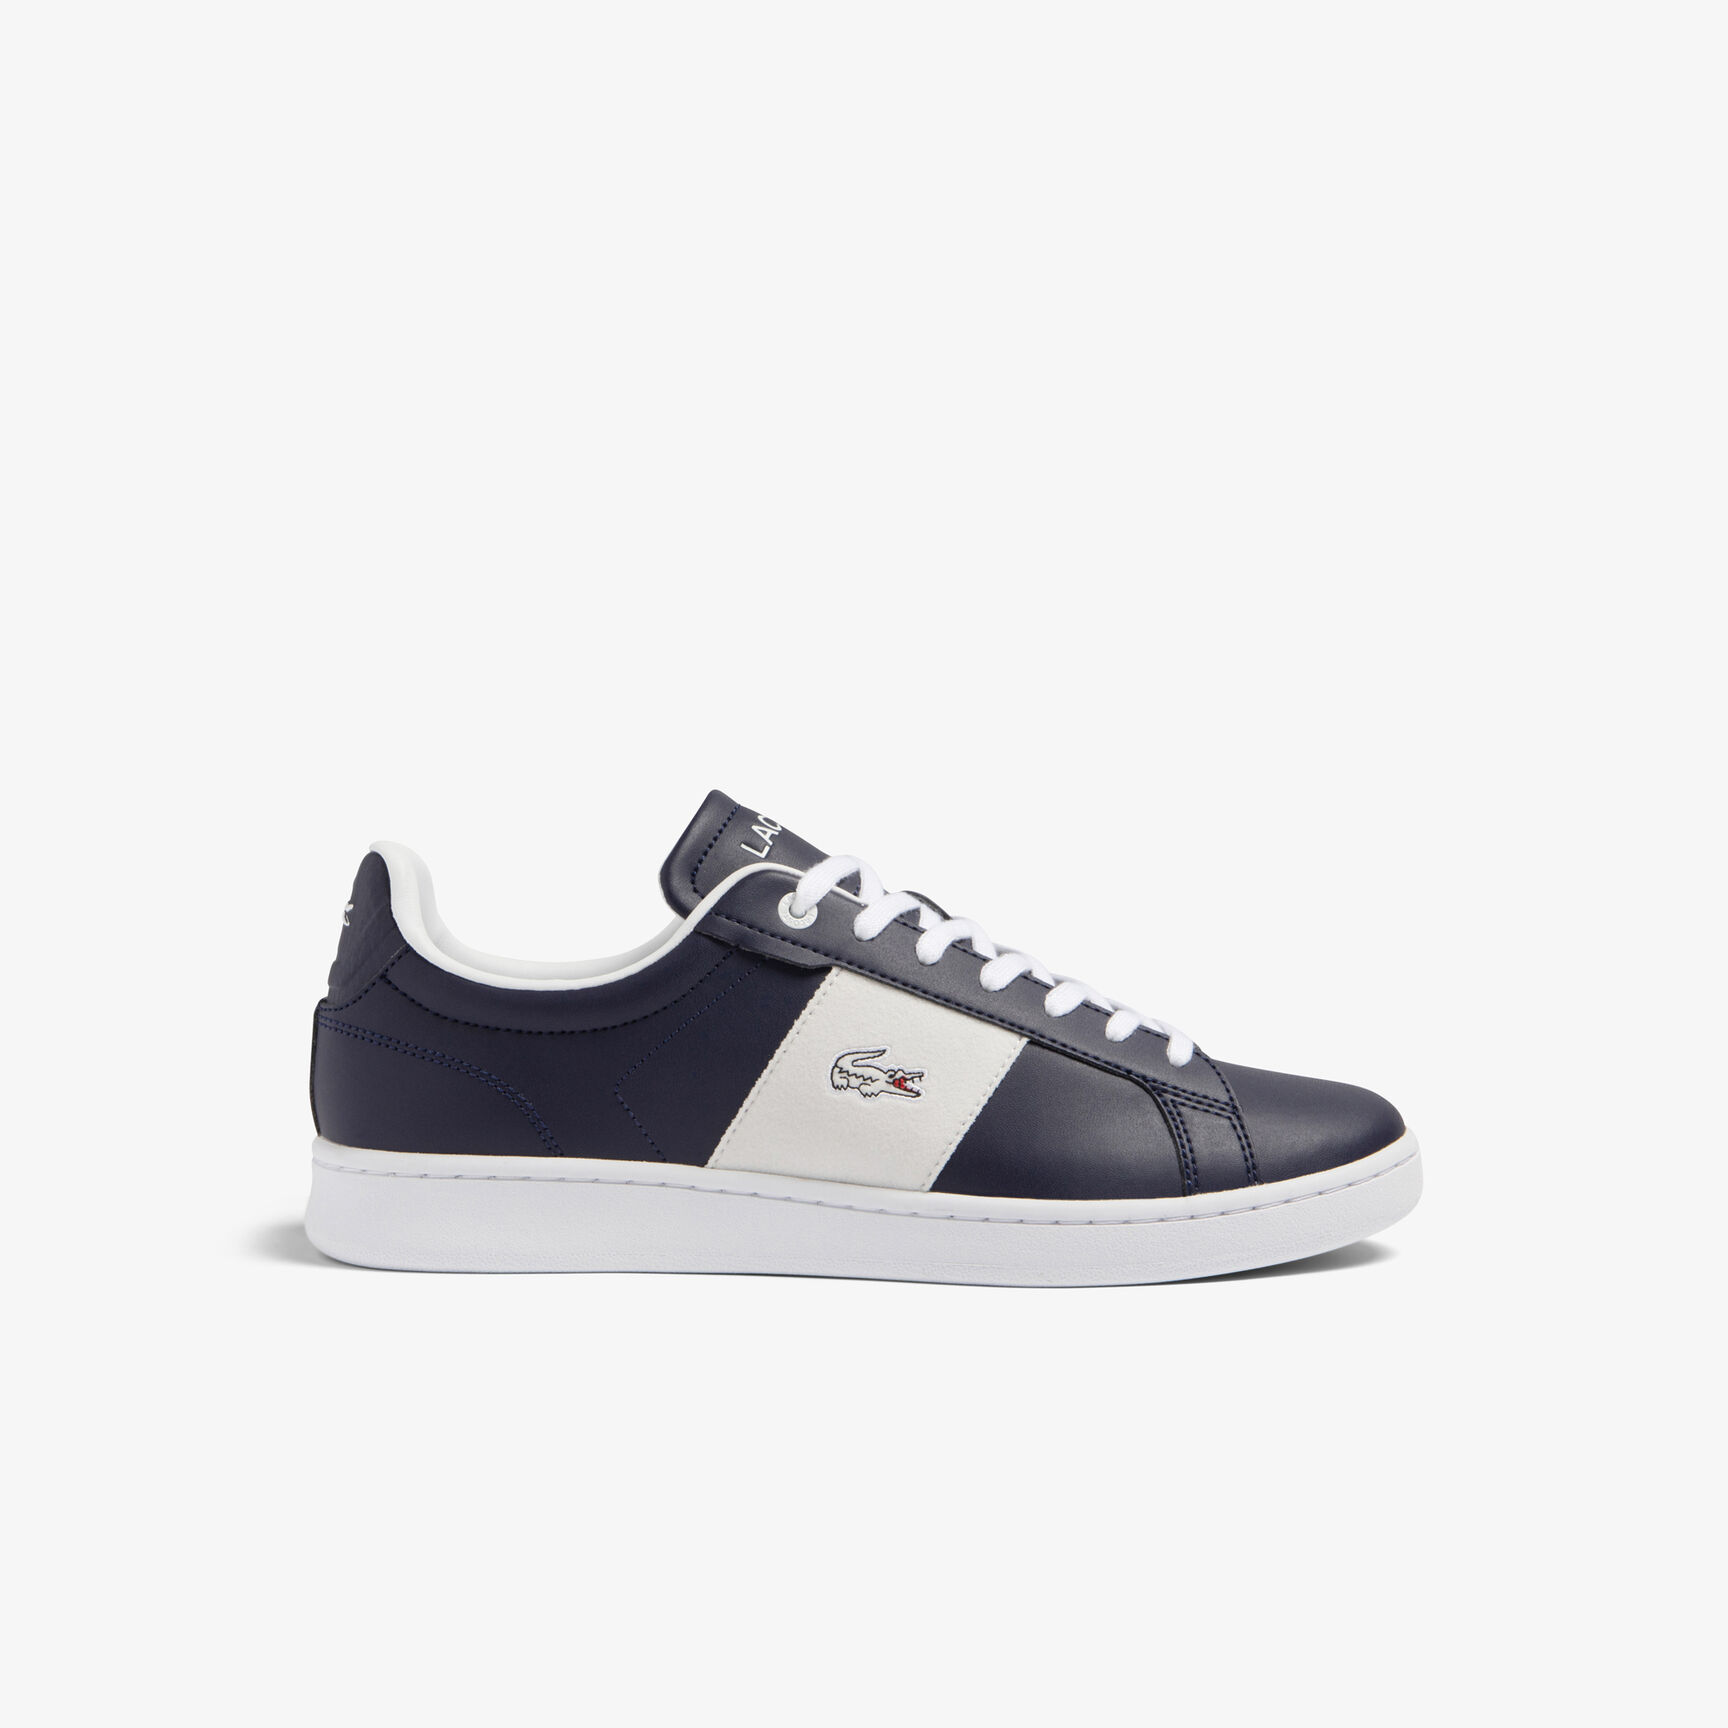 Buy Men's Lacoste Carnaby Pro Leather Colour Contrast Trainers ...